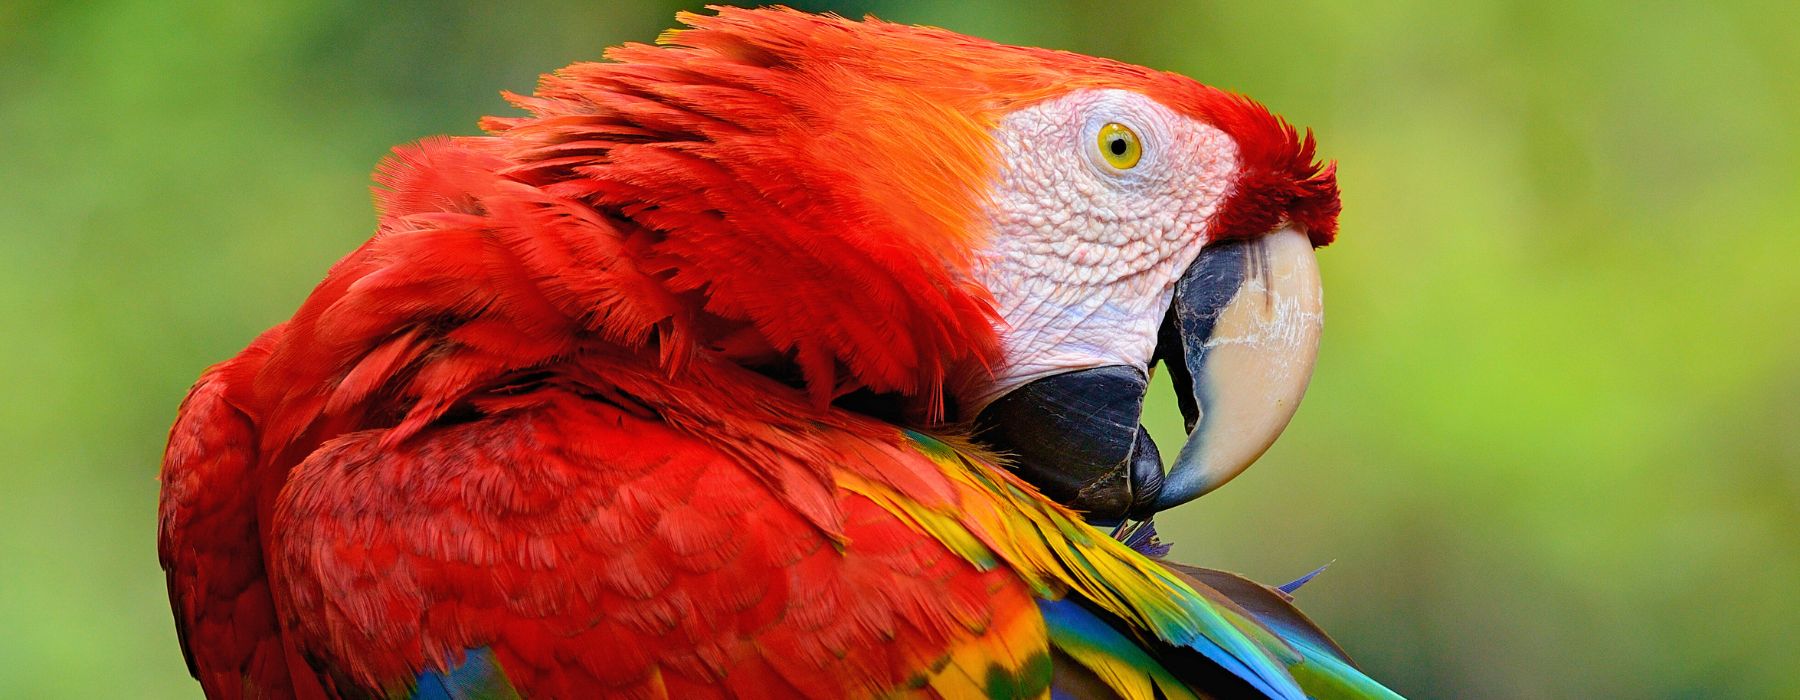 TOP 10 FACTS ABOUT MACAWS